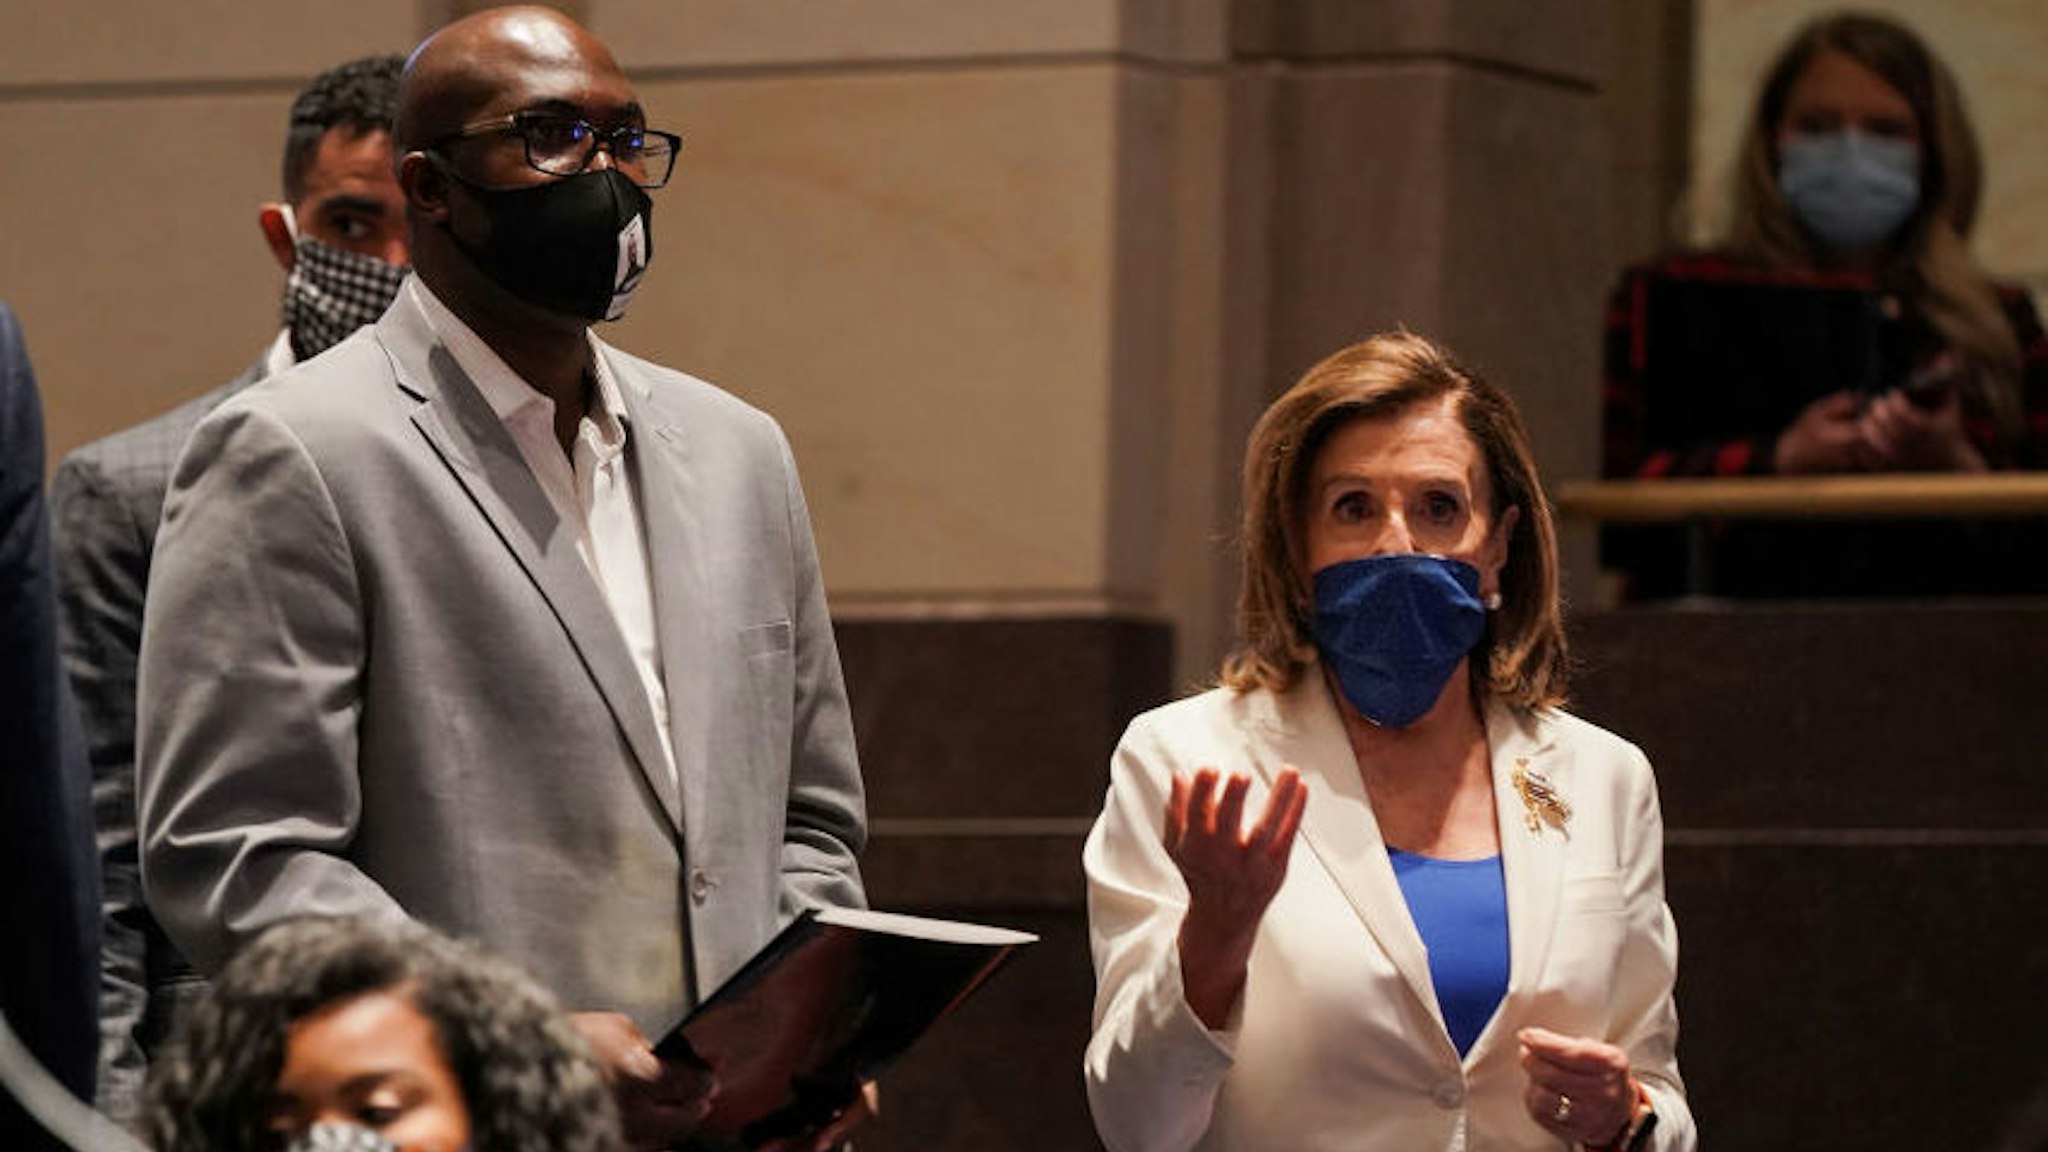 Philonise Floyd, brother of George Floyd; and U.S. House Speaker Nancy Pelosi arrive before a House Judiciary Committee hearing on police brutality and racial profiling on June 10, 2020 in Washington, DC.